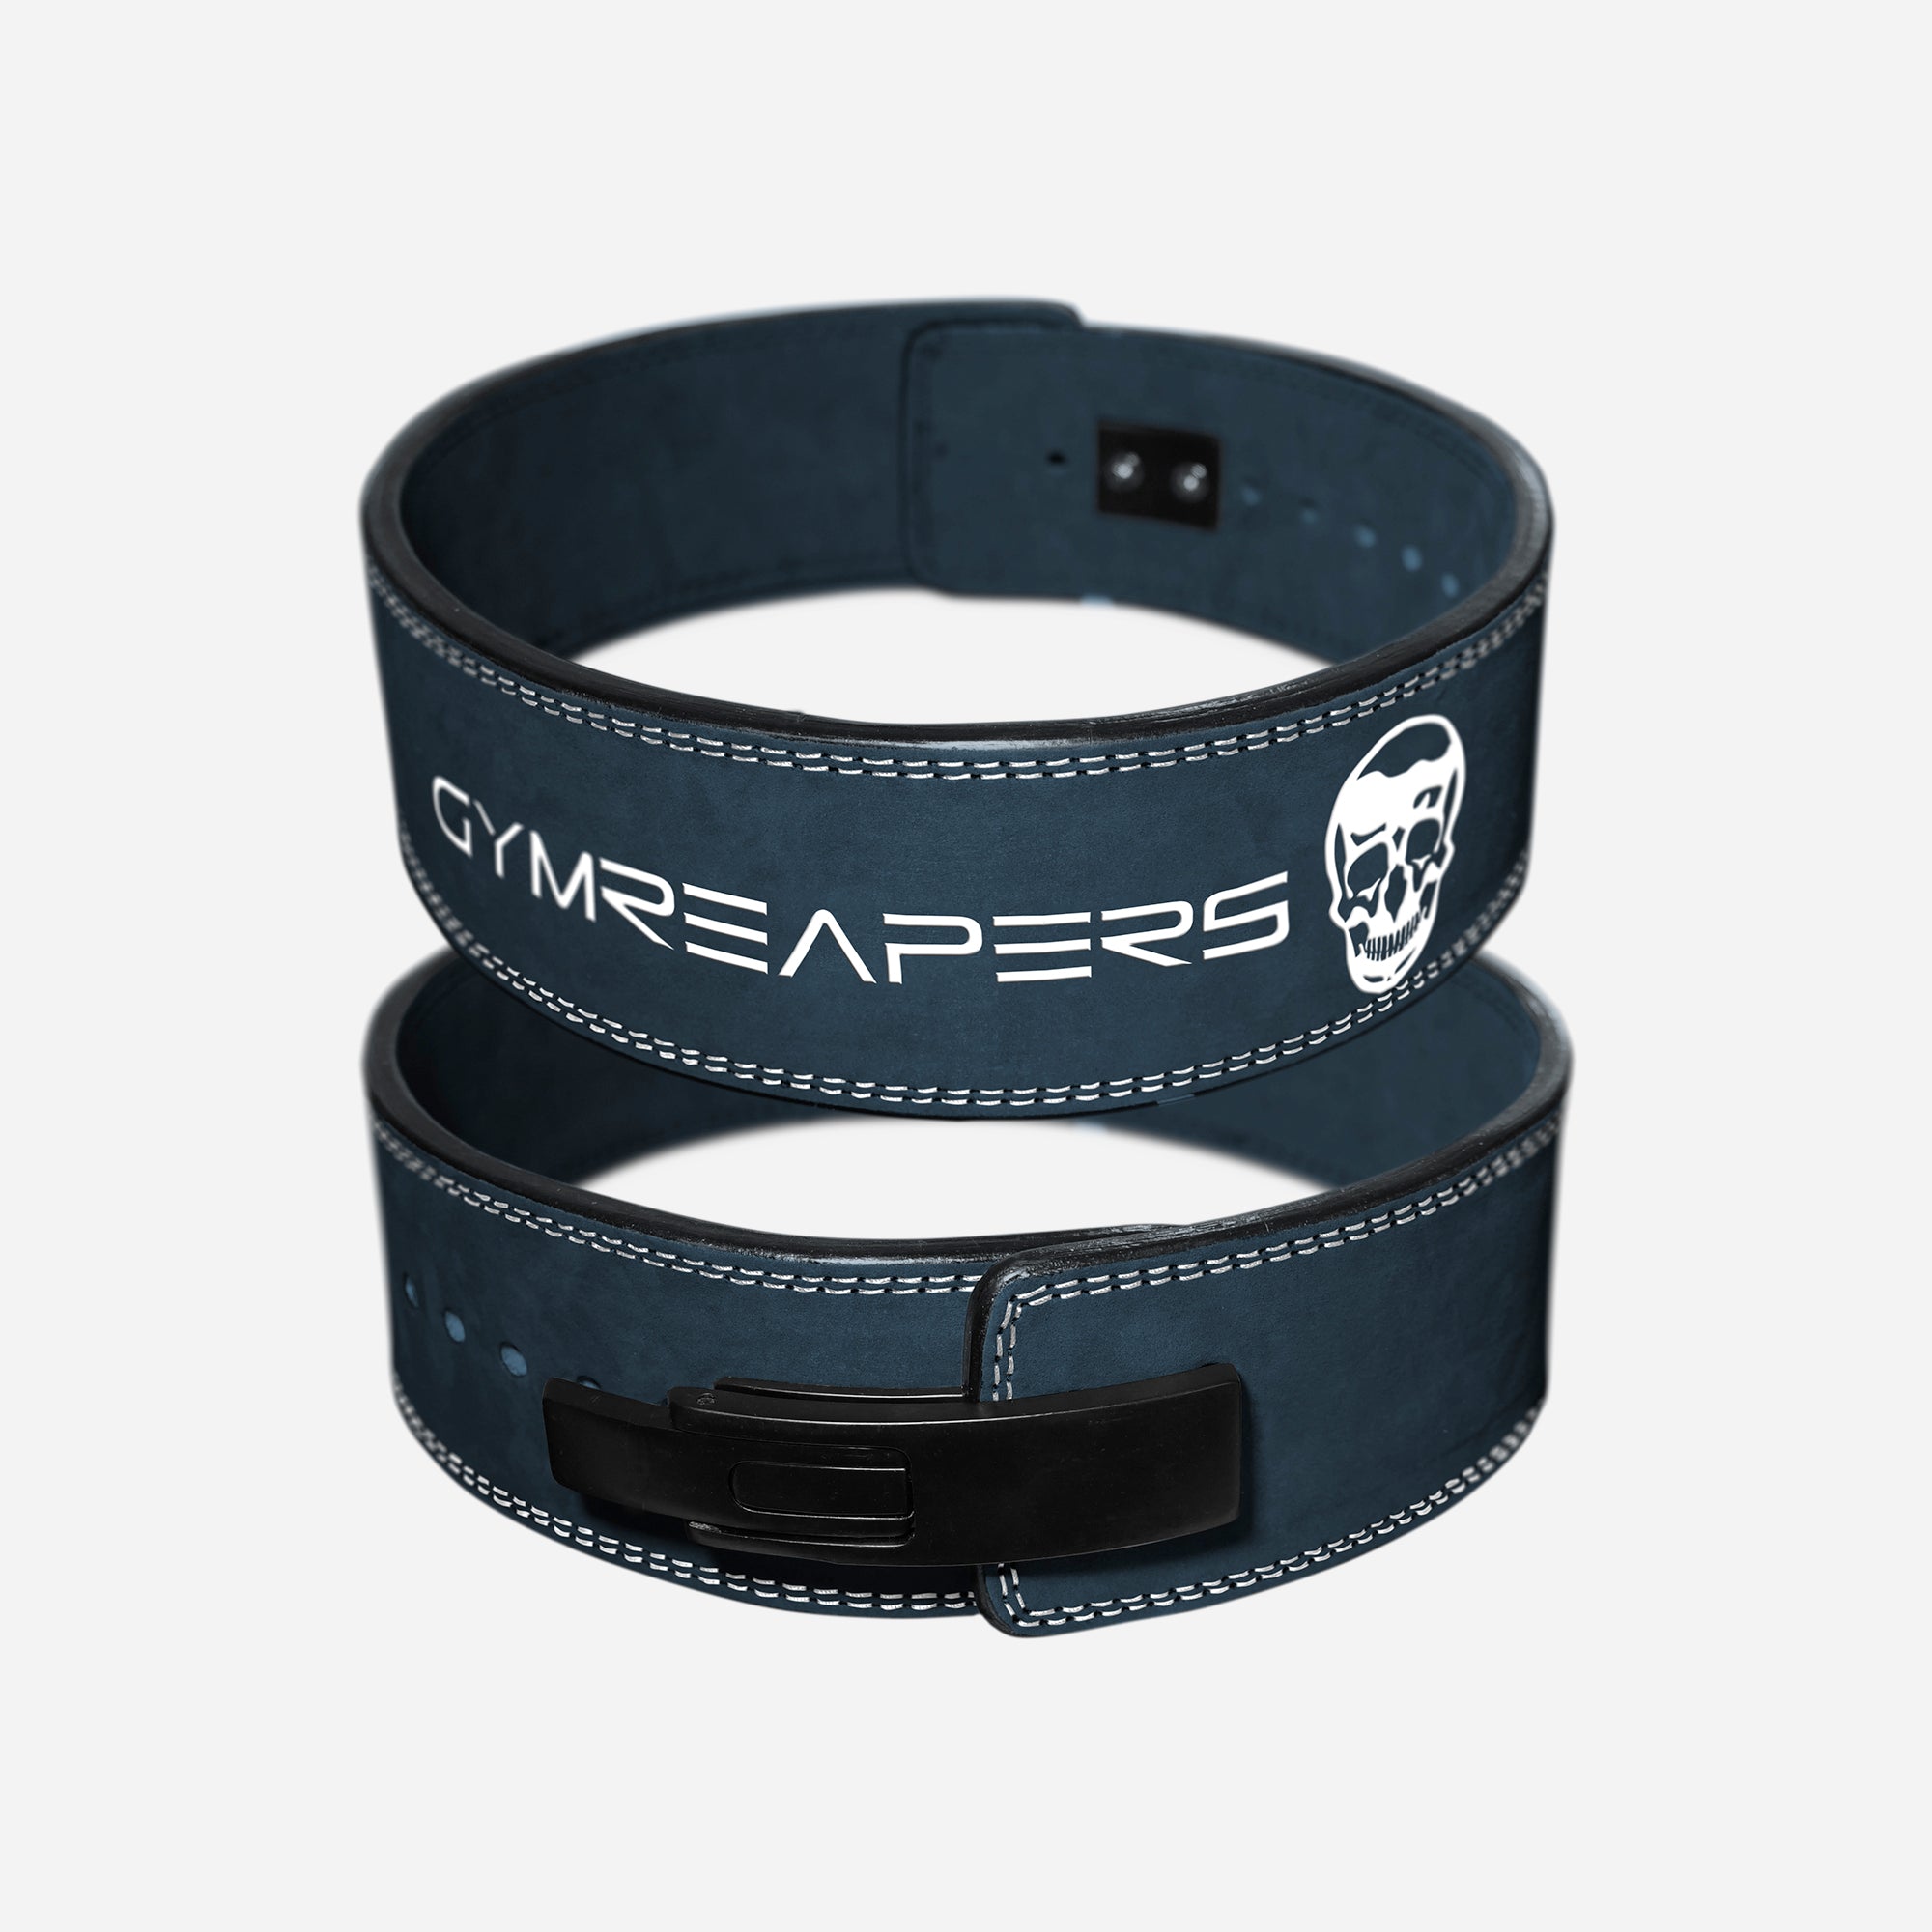 Gymreapers Strength Kit - 10MM White Camo  Wrist wrap, Lifting straps,  Knee sleeves